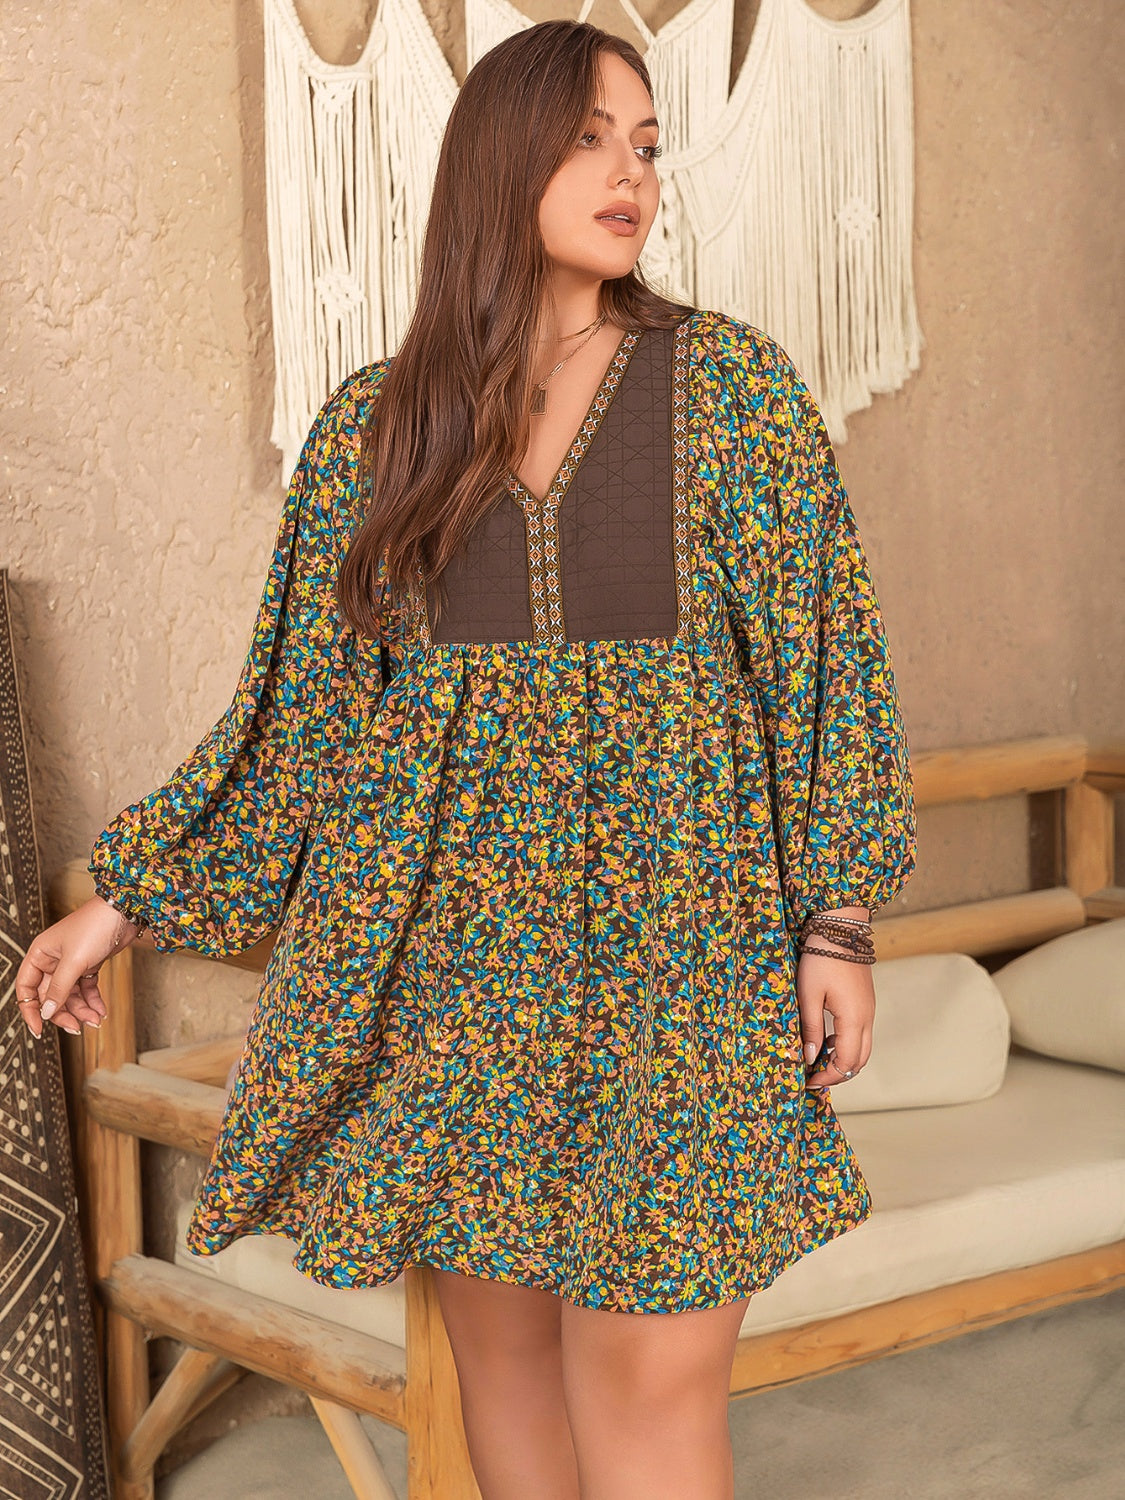 Elegant Plus Size Beach Wedding Guest Dress - V-Neck Balloon Sleeve Mini Dress with Beautiful Prints, Perfect for Any Summer Occasion